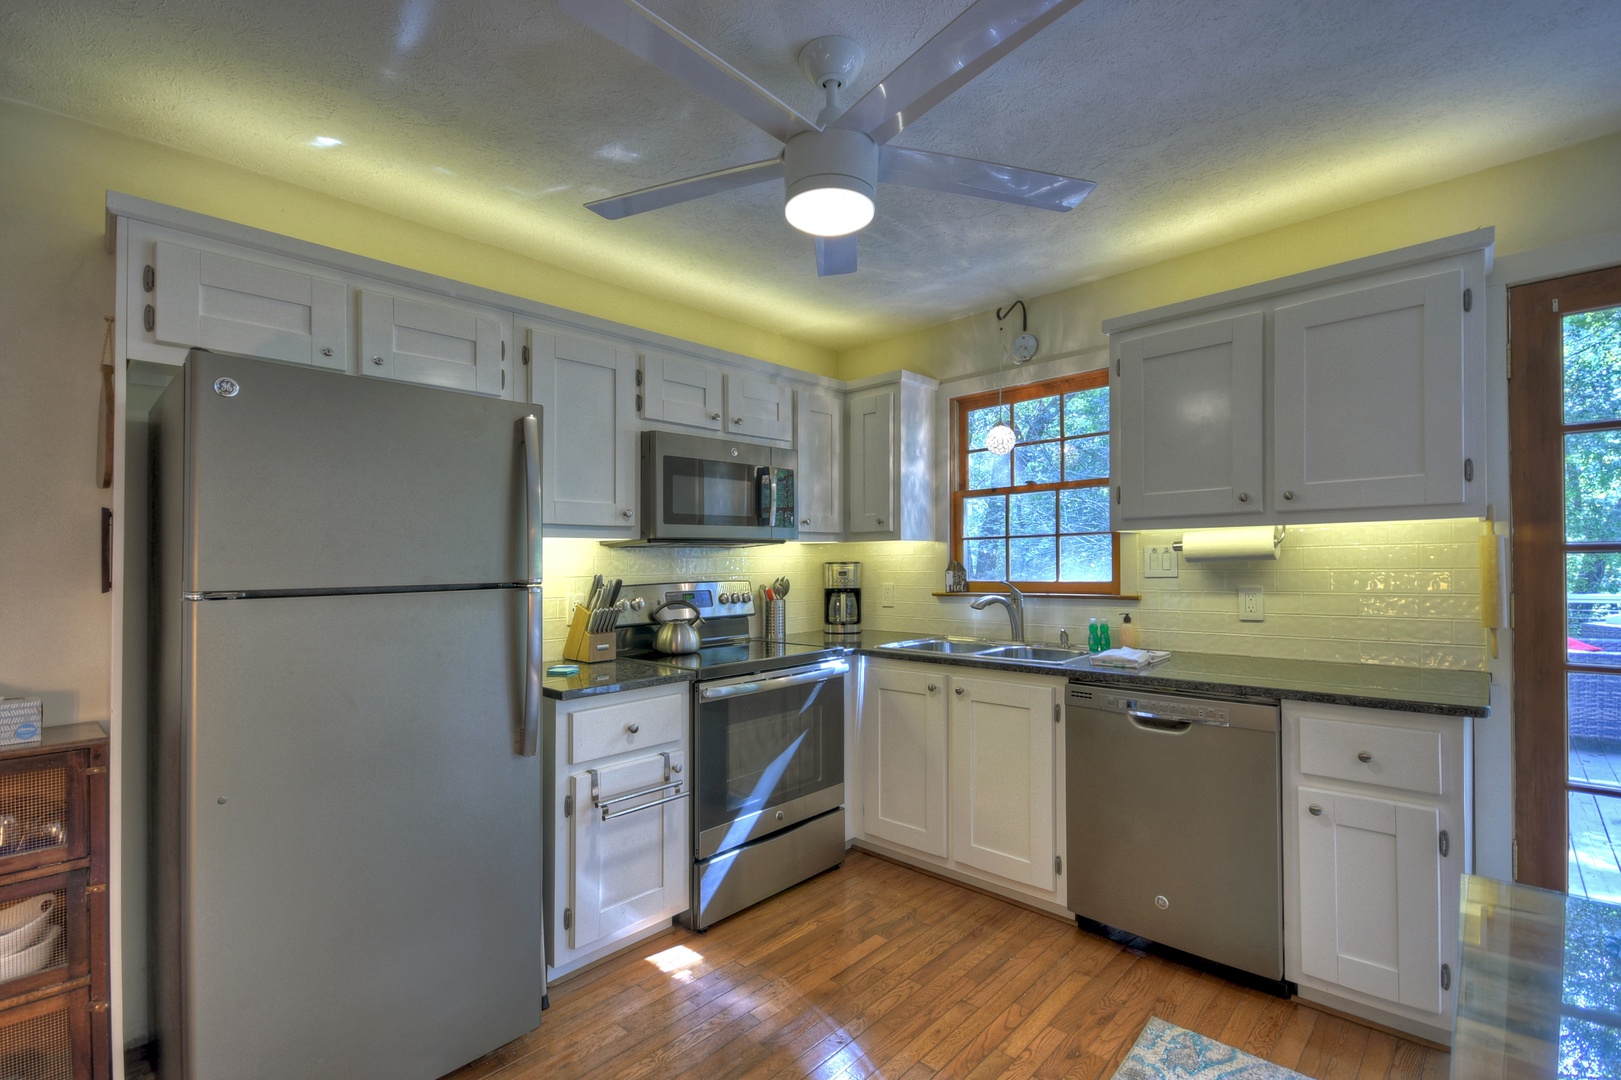 Sipping Rise- Fully equipped kitchen area with matching appliances